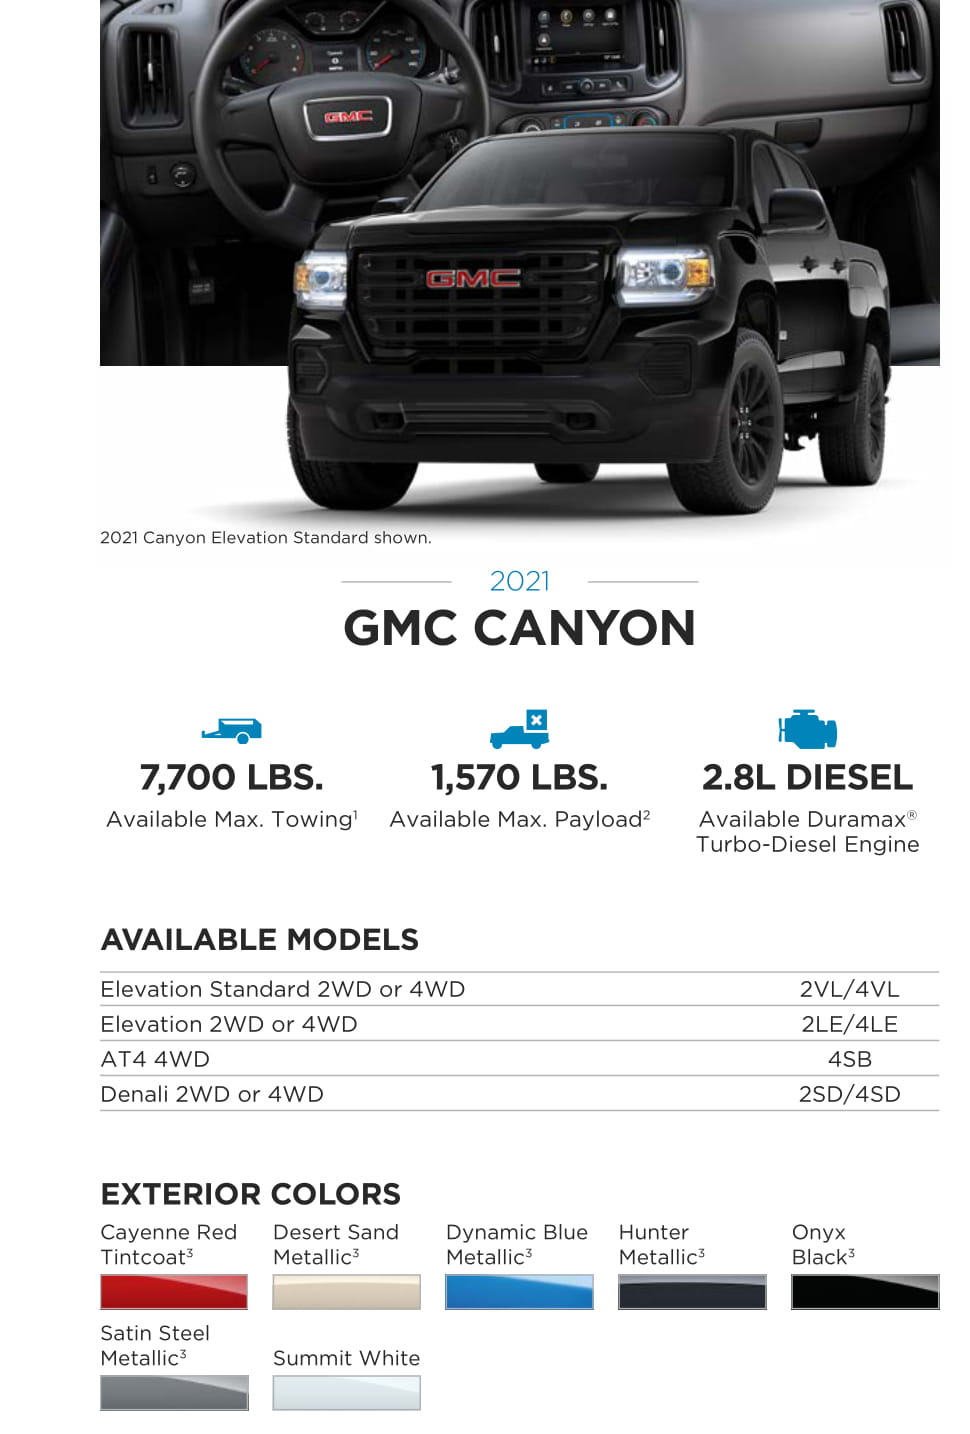 Models and Paint Colors used for this GMC Vehicle in 2021